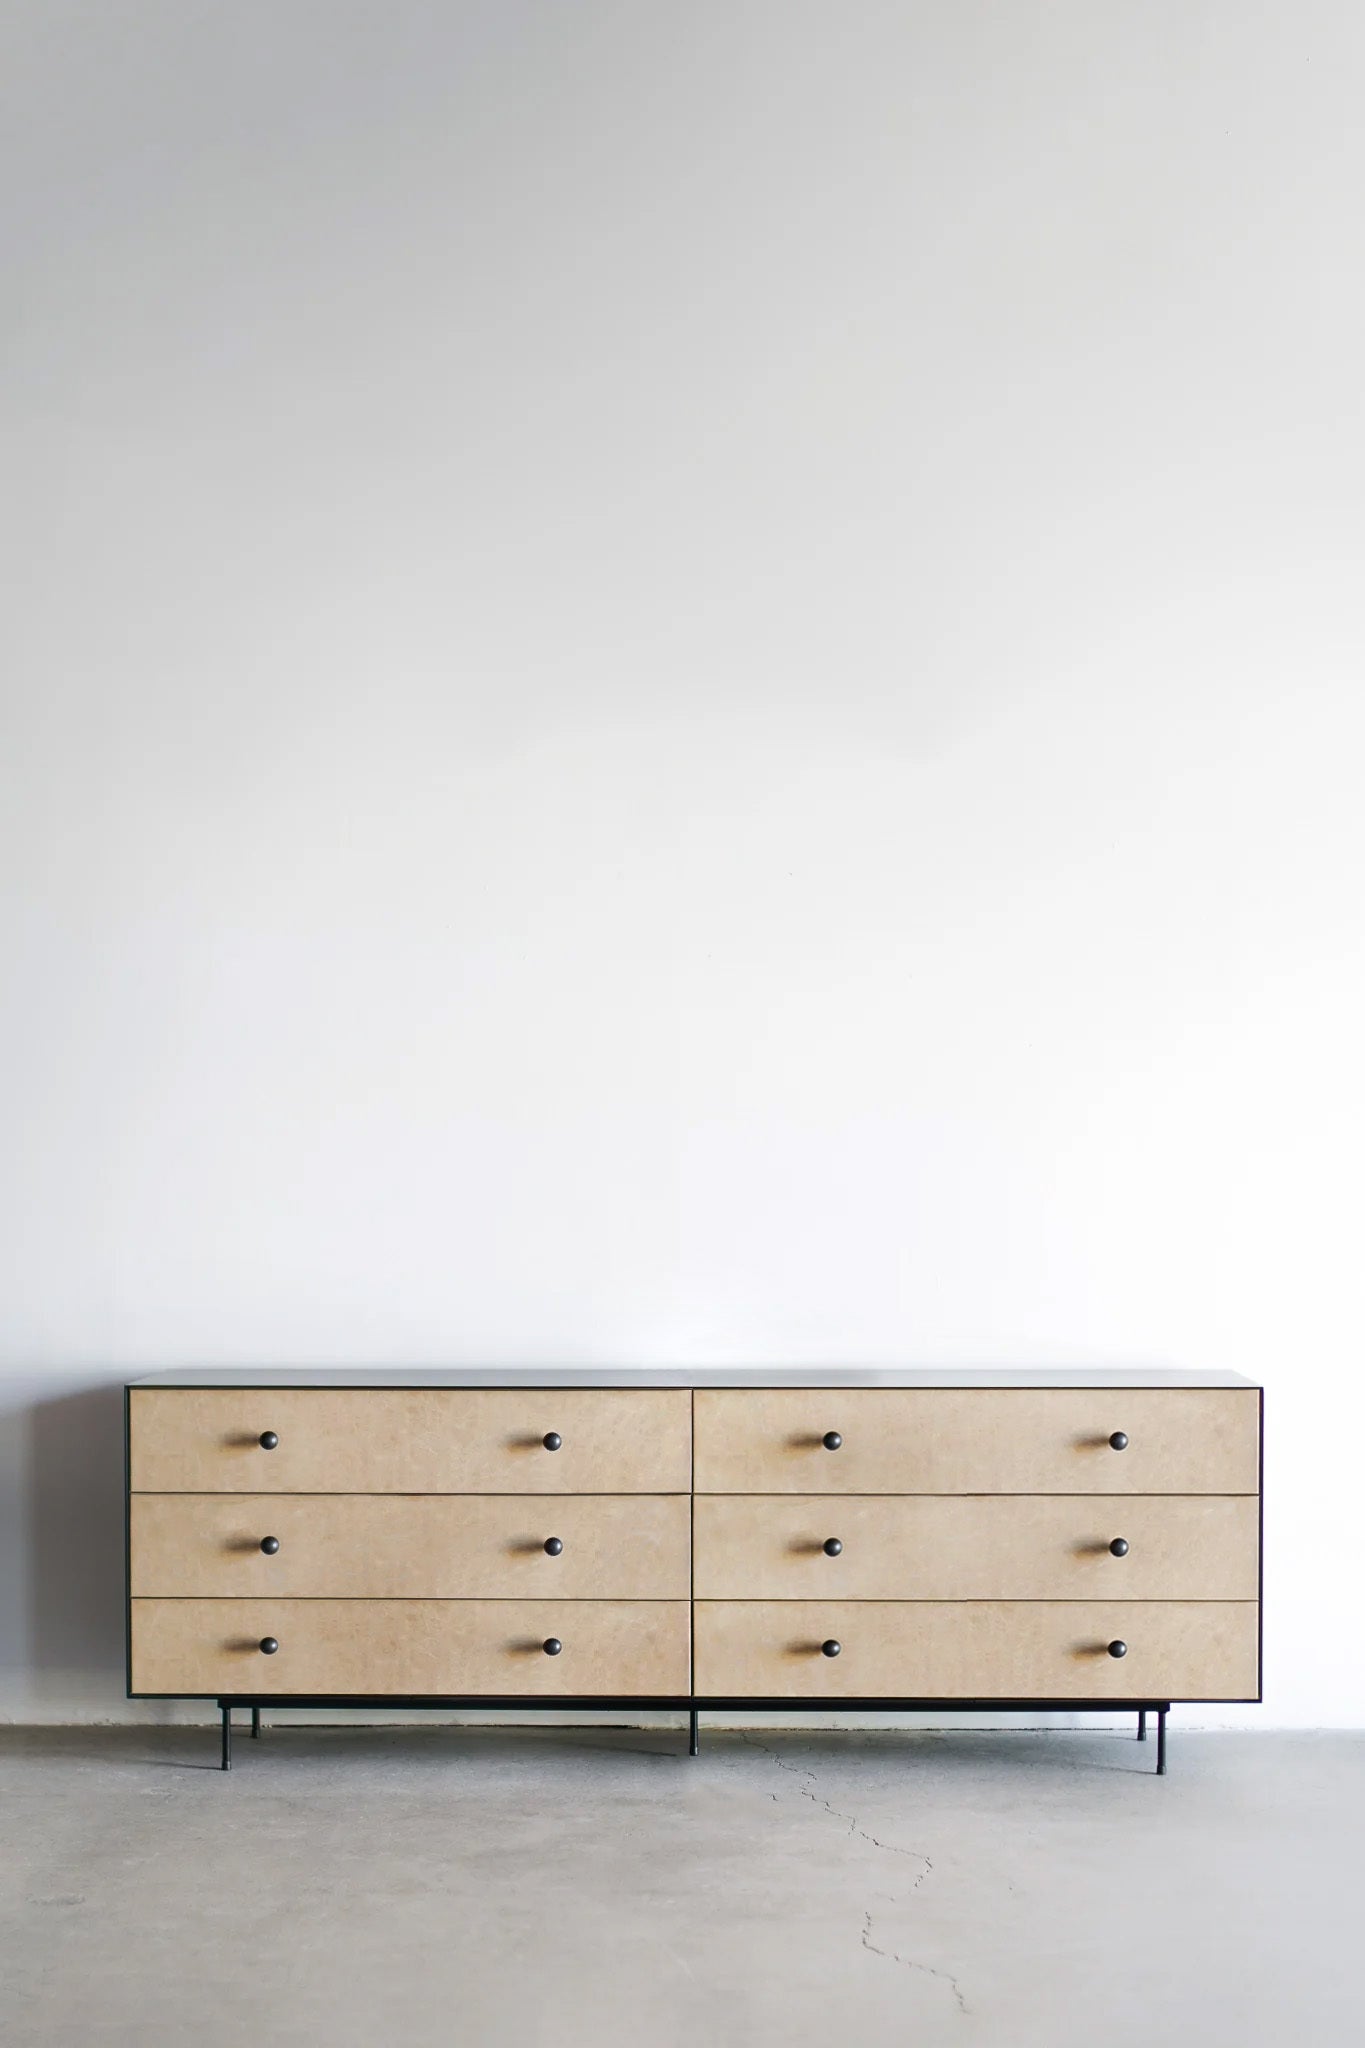 A solo image of the six drawer Norah Dresser with no styling